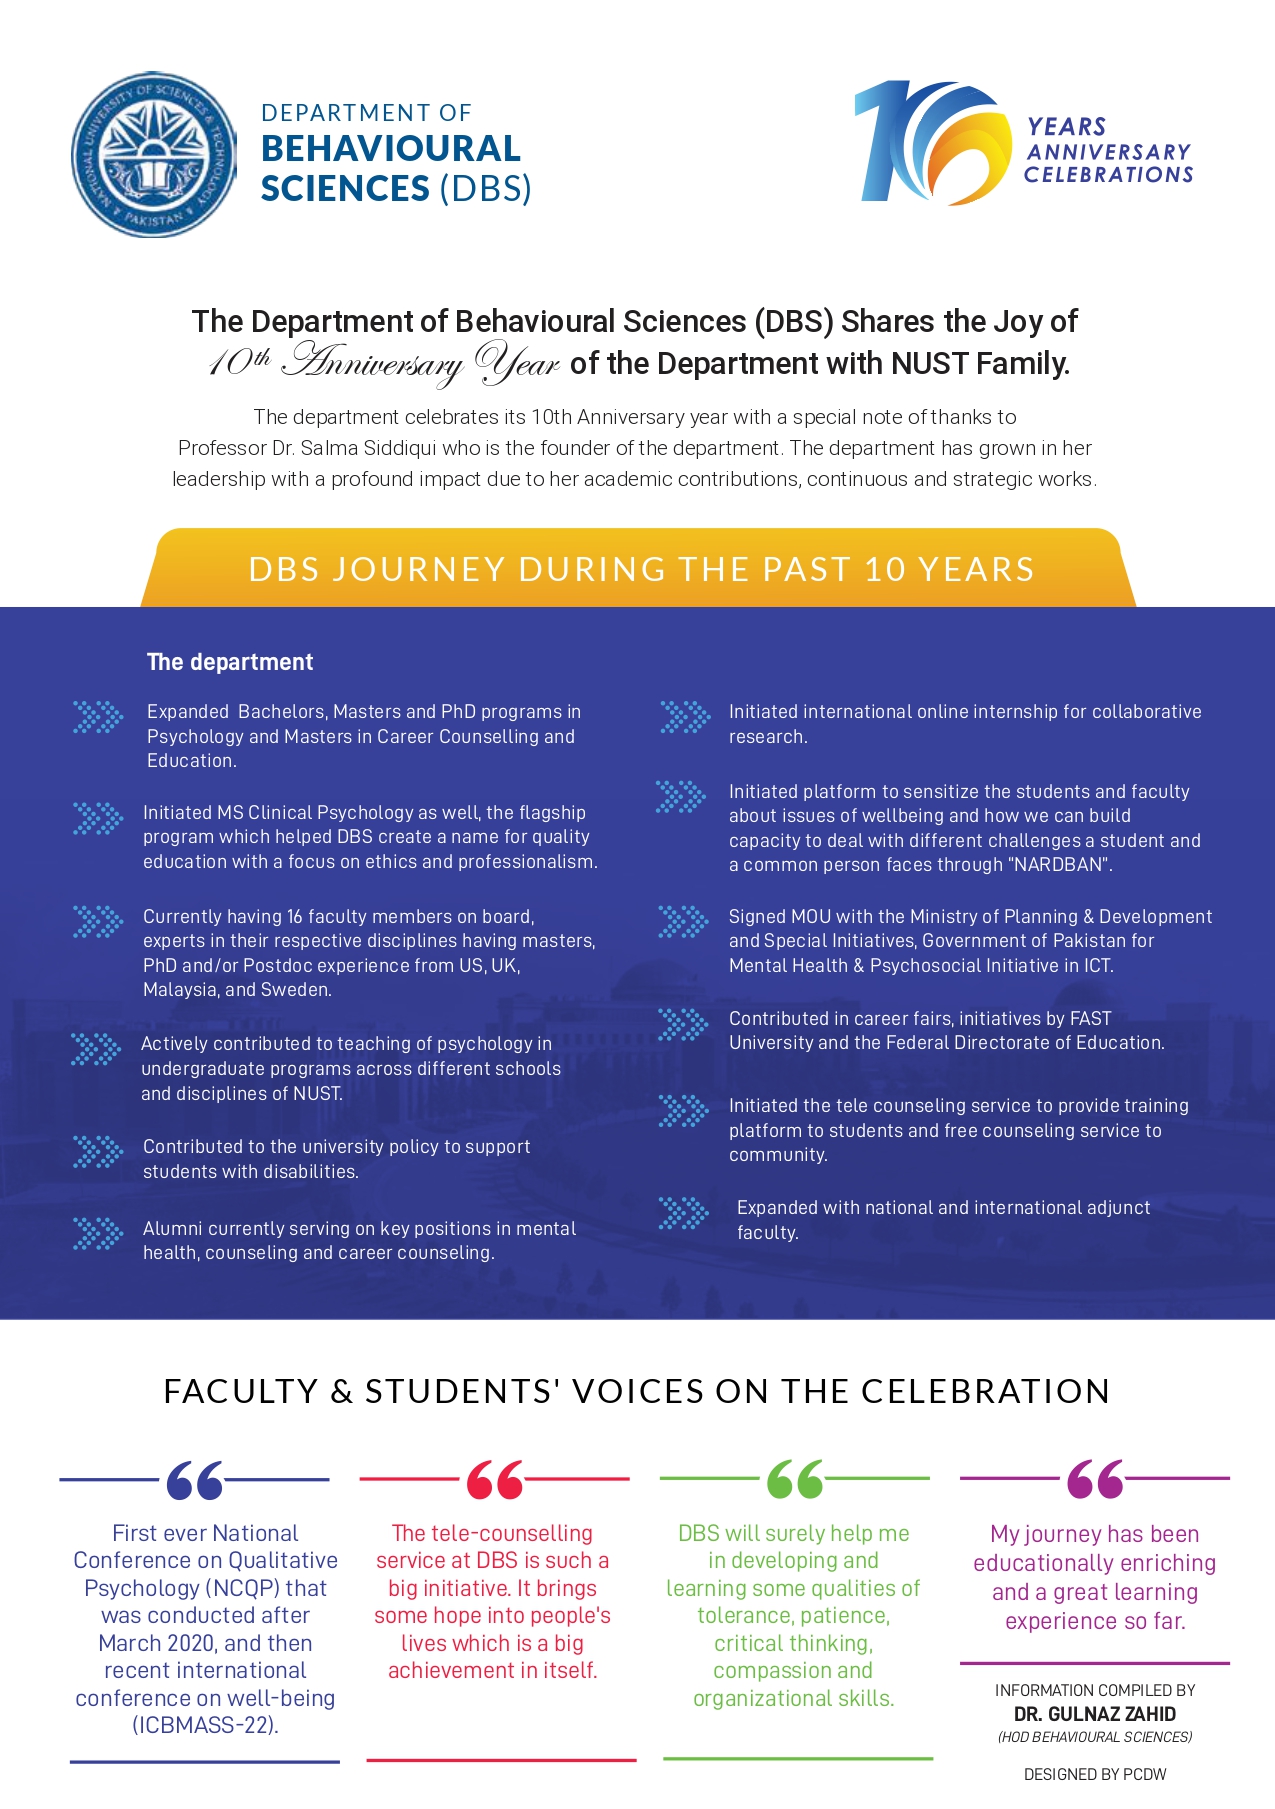 The Department of Behavioural Sciences at NUST School of Social Sciences & Humanities (S3H) celebrates its 10th Anniversary